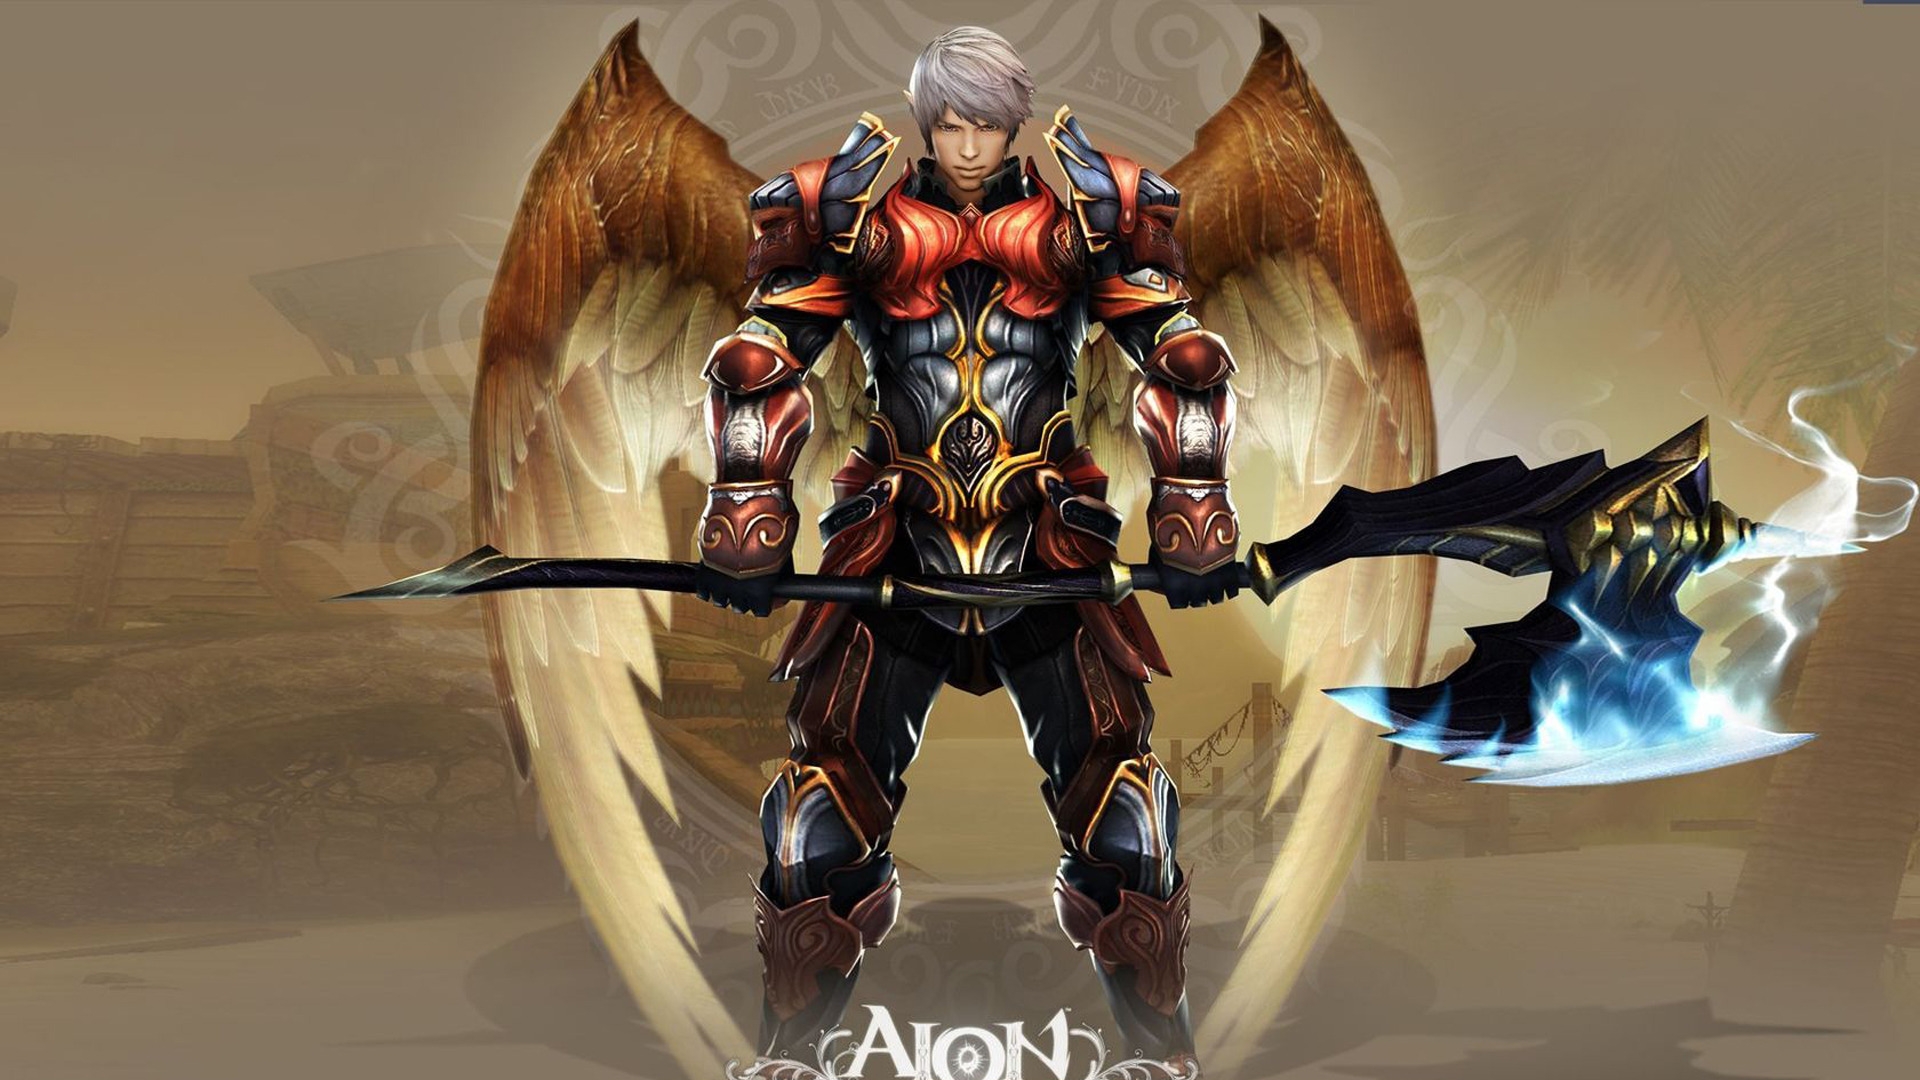 Aion for 1920 x 1080 HDTV 1080p resolution